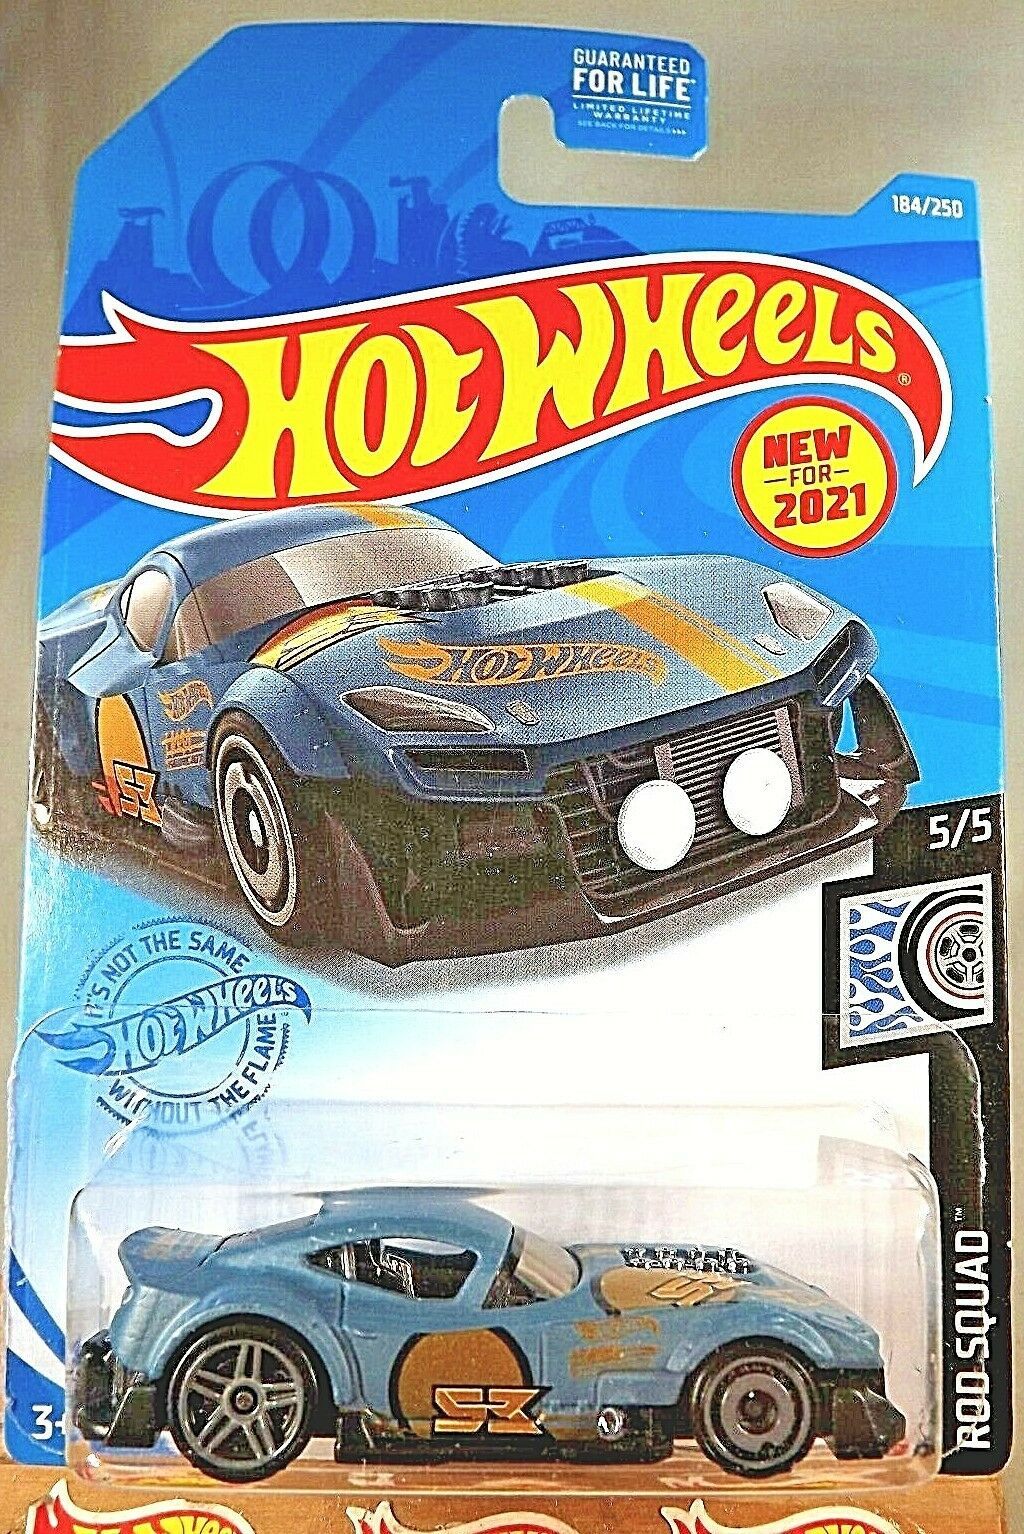 2021 Hot Wheels #184 Rod Squad 5/5 MUSCLE and BLOWN' Steel-Blue w/Gray Pr5-AD Sp